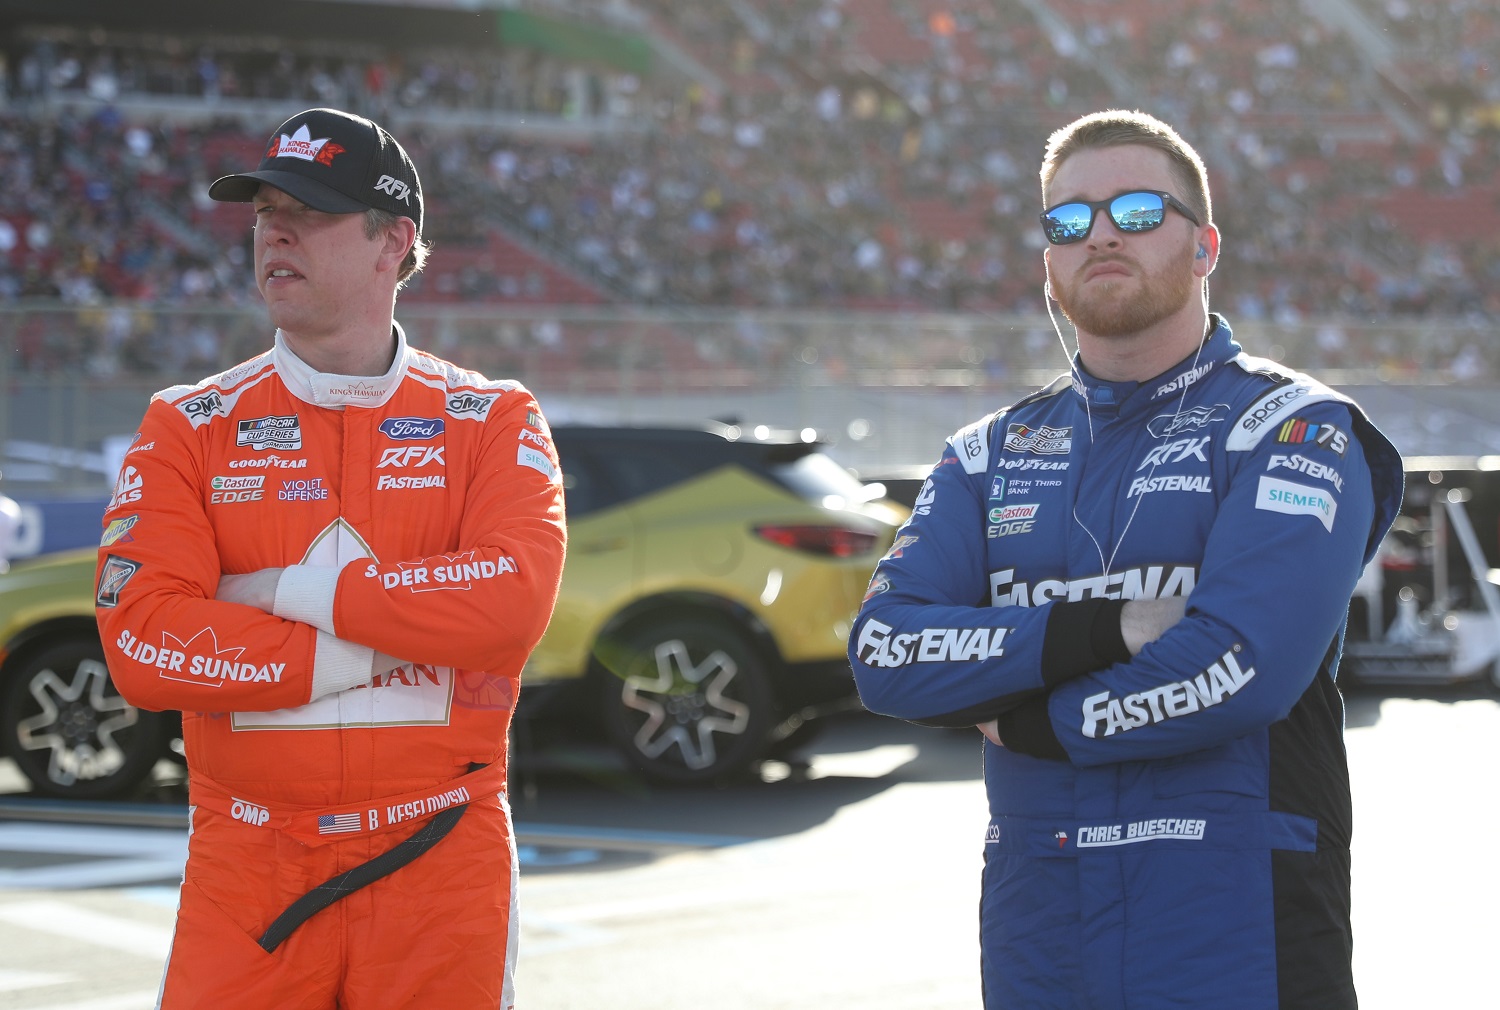 Brad Keselowski and Chris Buescher look on during qualifying heats for the Busch Light Clash at Los Angeles Coliseum on Feb. 5, 2023. | Meg Oliphant/Getty Images